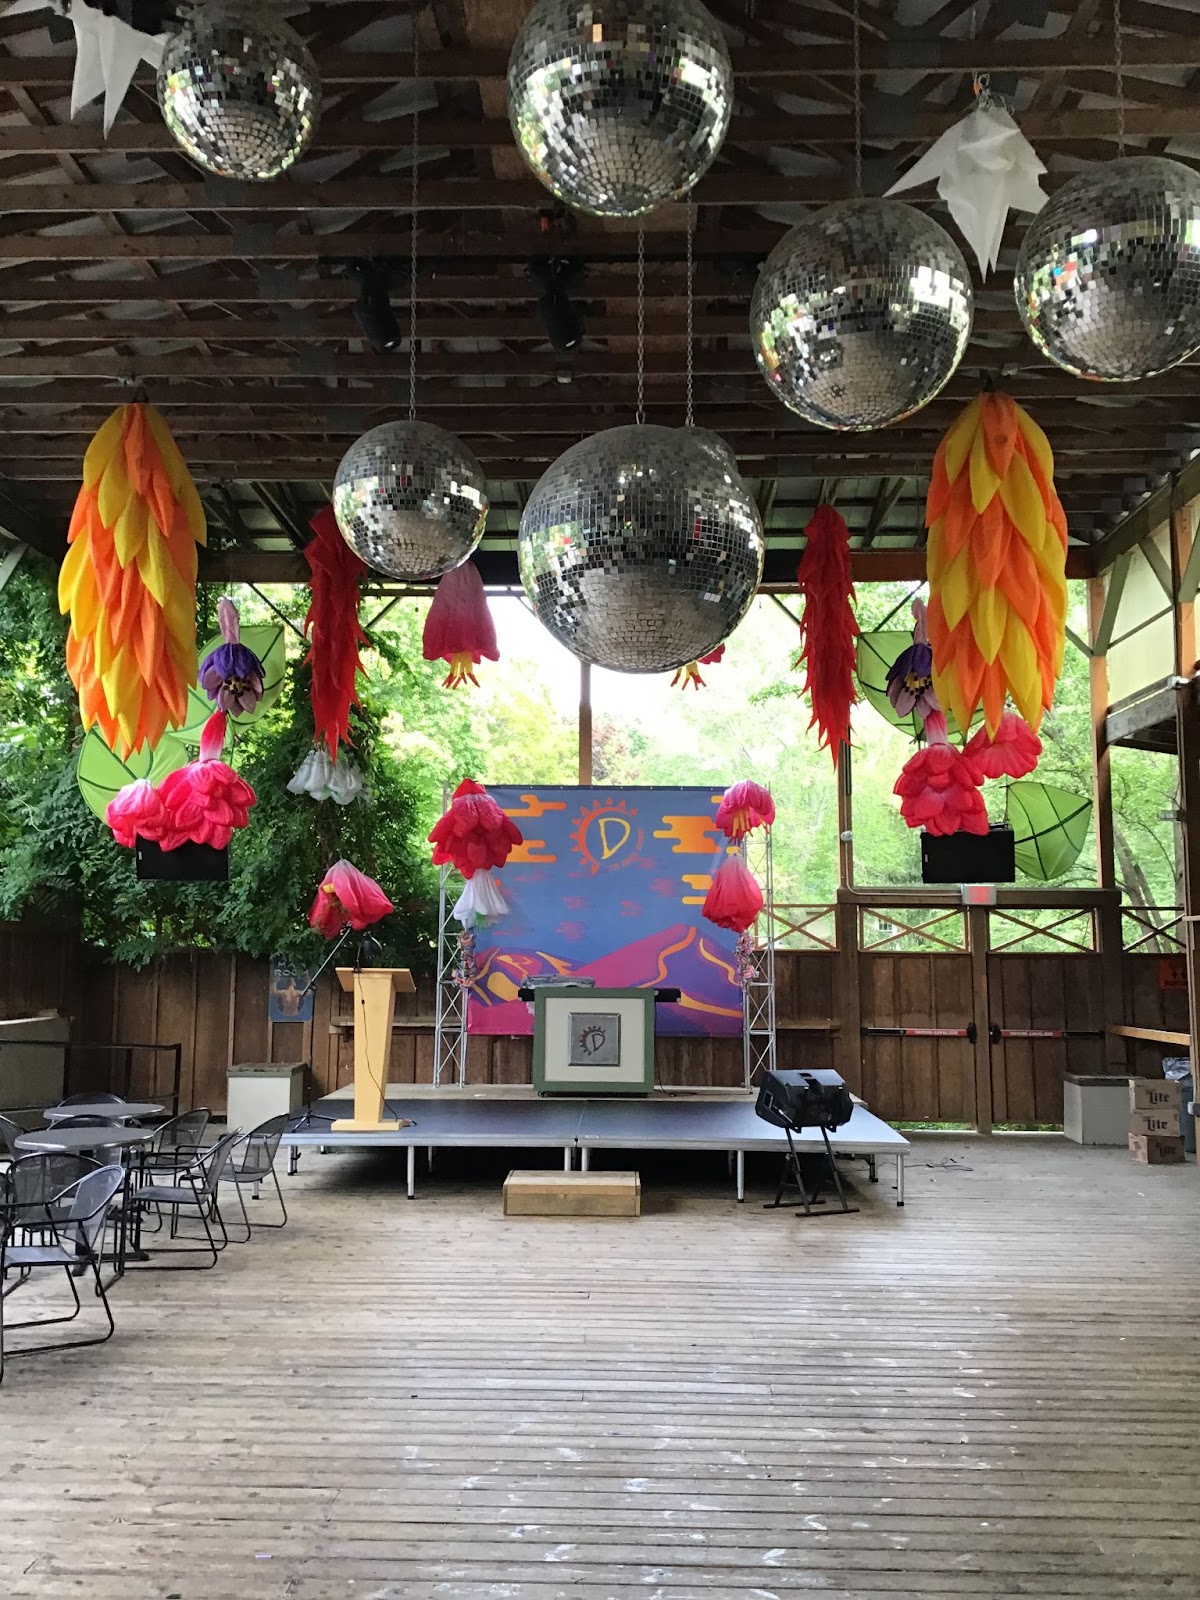 The Vinyl lounge dance floor and space at the LGBTQ resort The dunes in Michigan USA